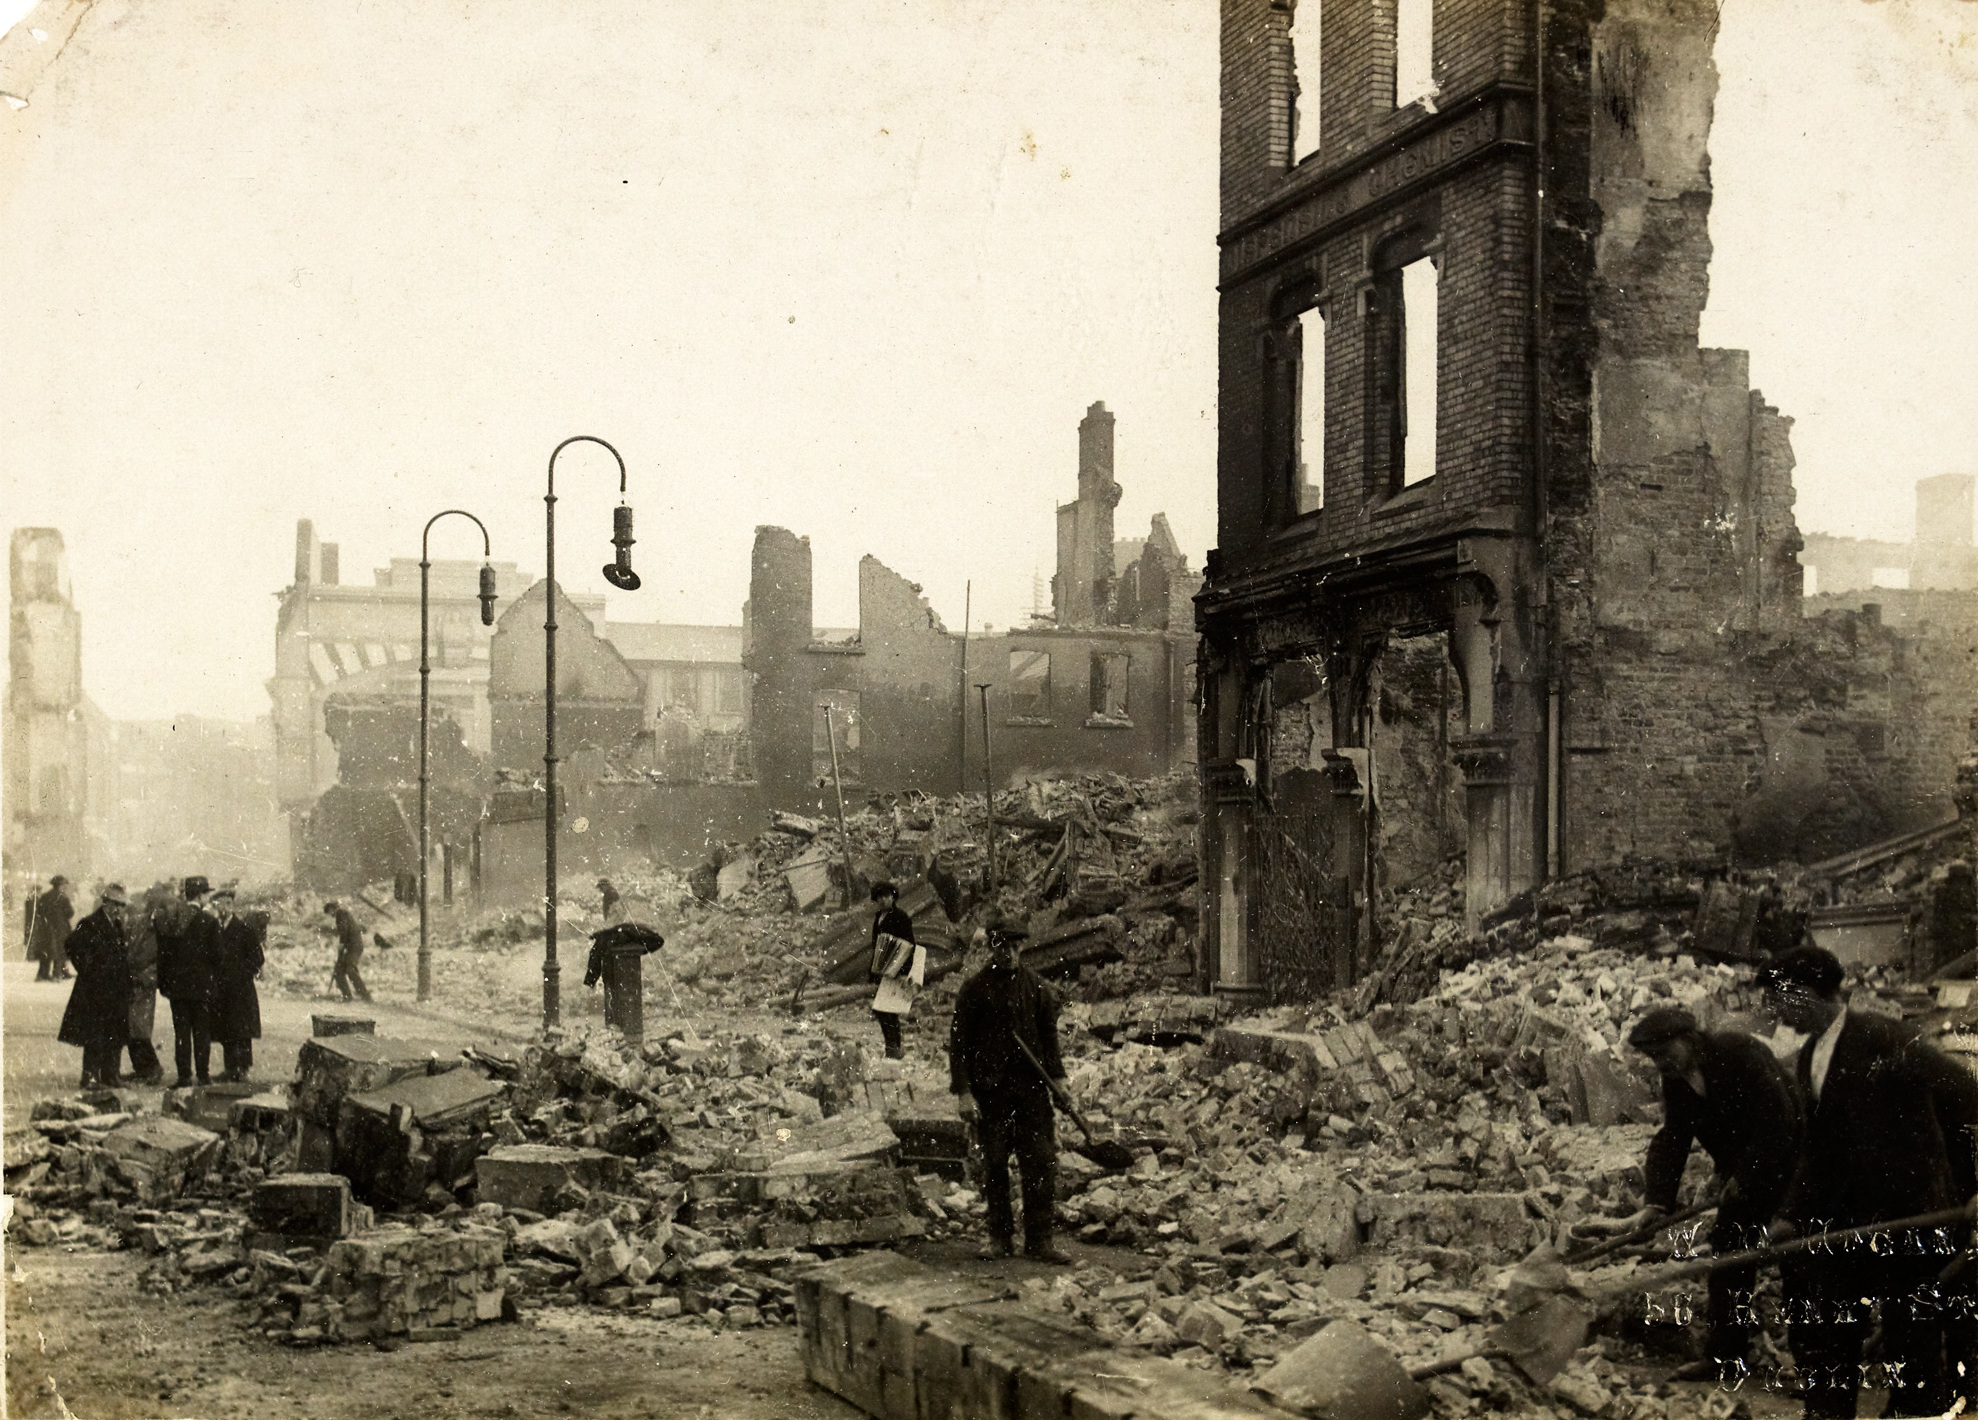 December 1920 photograph showing St Patrick's Street, Cork, following the burning of the city by British forces.